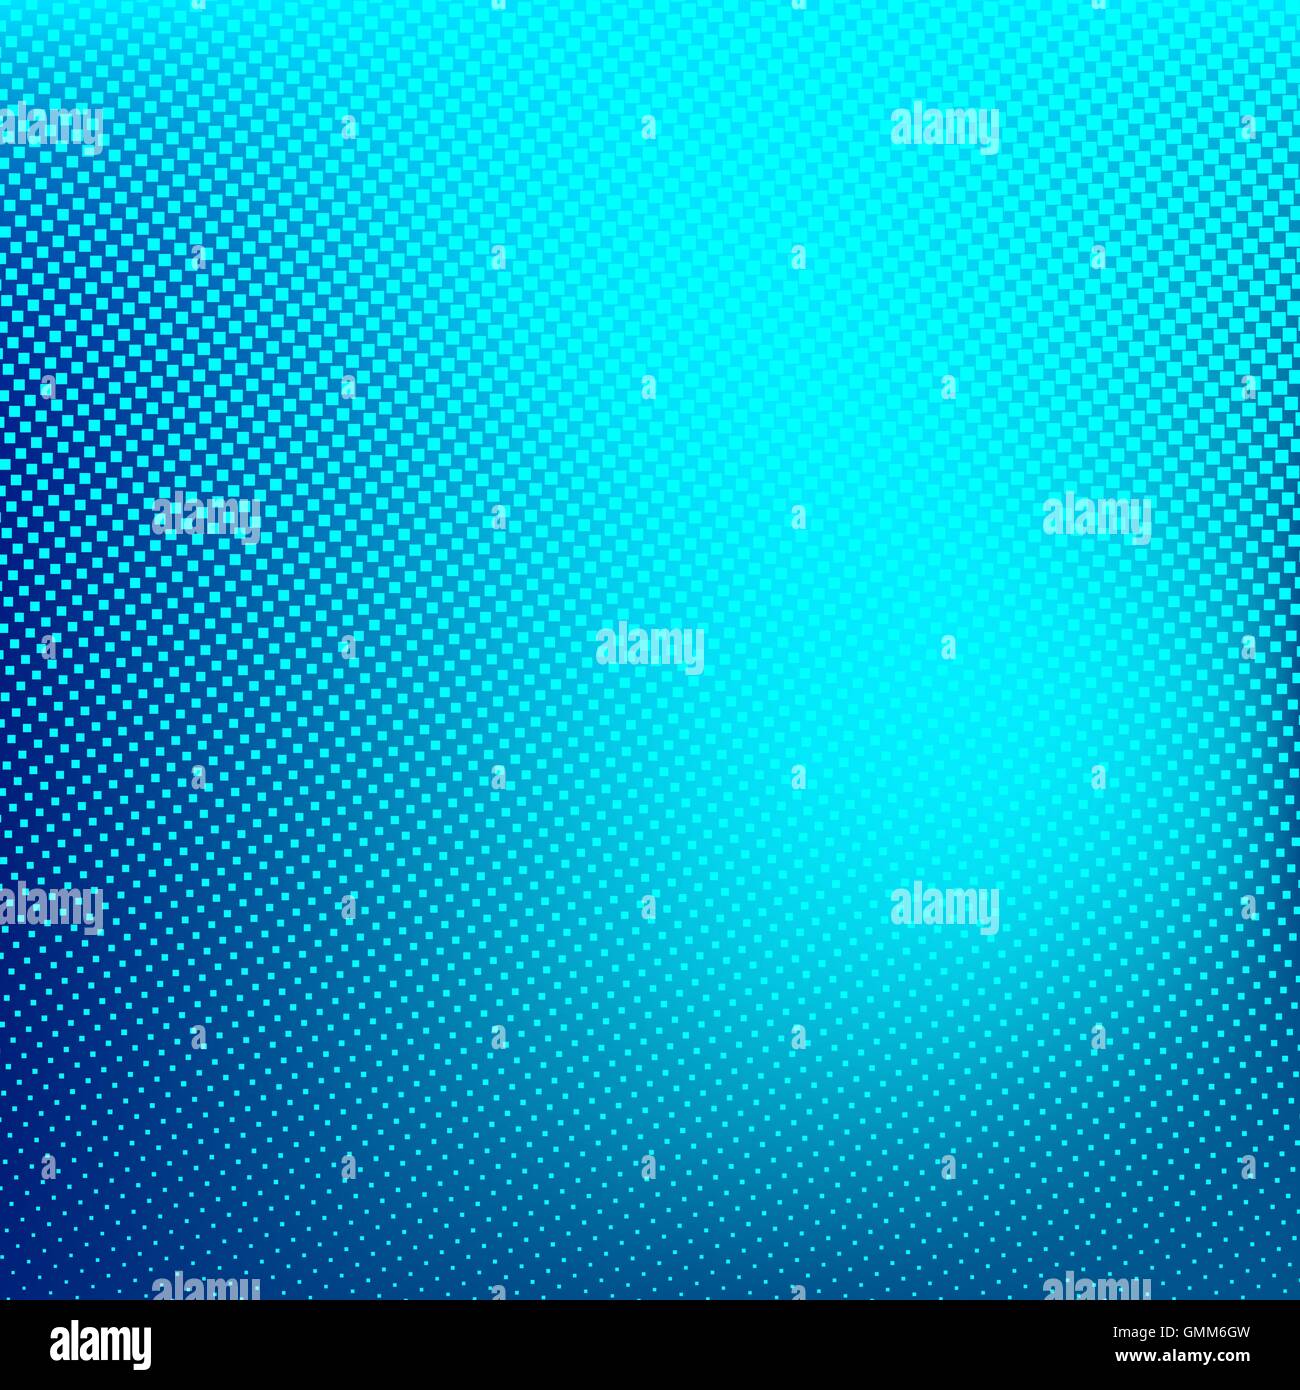 Blue abstract halftone background. Creative vector illustration Stock Vector